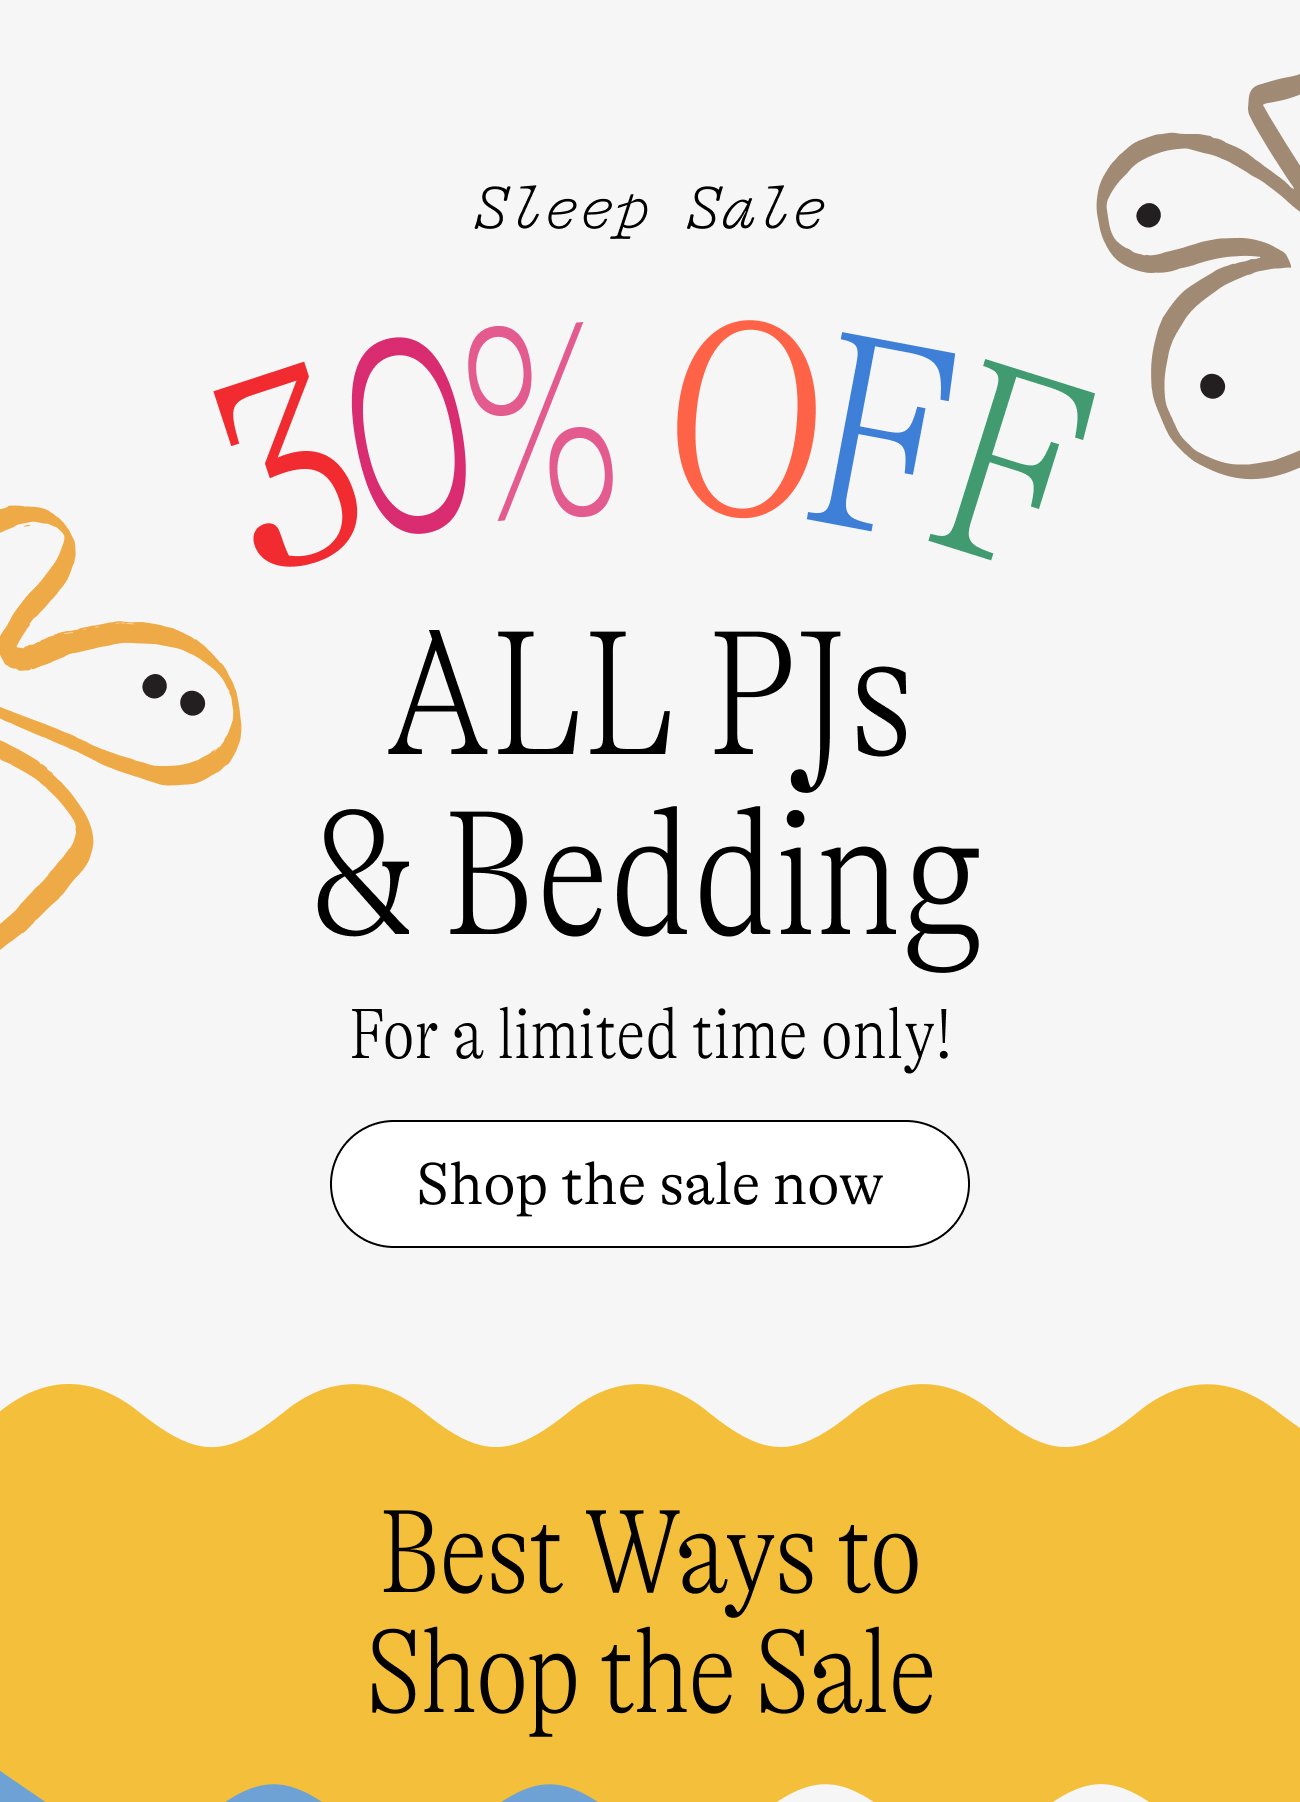 Sleep Sale: 30% OFF ALL PJs & Bedding. For a limited time only! Shop the sale now. Best Ways to Shop the Sale